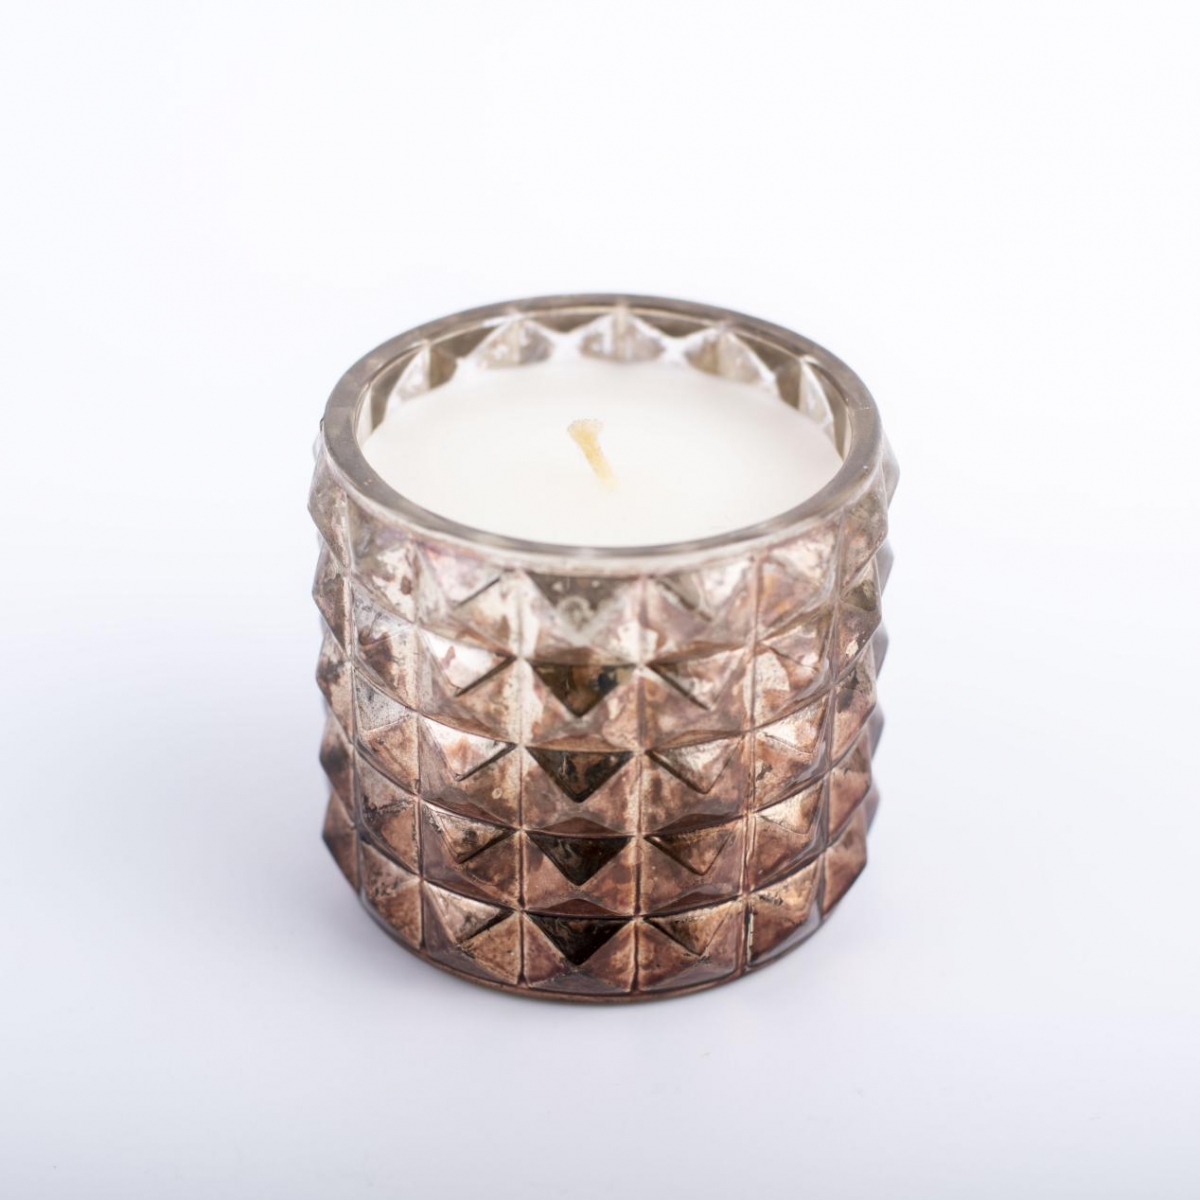 Scented Candles -Soy Wax ,Essential Oil ,Vegan Candles ,Sculpture Diamond ,Gold Gradient Brown Glass Jar ,China Factory ,Price-HOWCANDLE-Candles,Scented Candles,Aromatherapy Candles,Soy Candles,Vegan Candles,Jar Candles,Pillar Candles,Candle Gift Sets,Essential Oils,Reed Diffuser,Candle Holder,